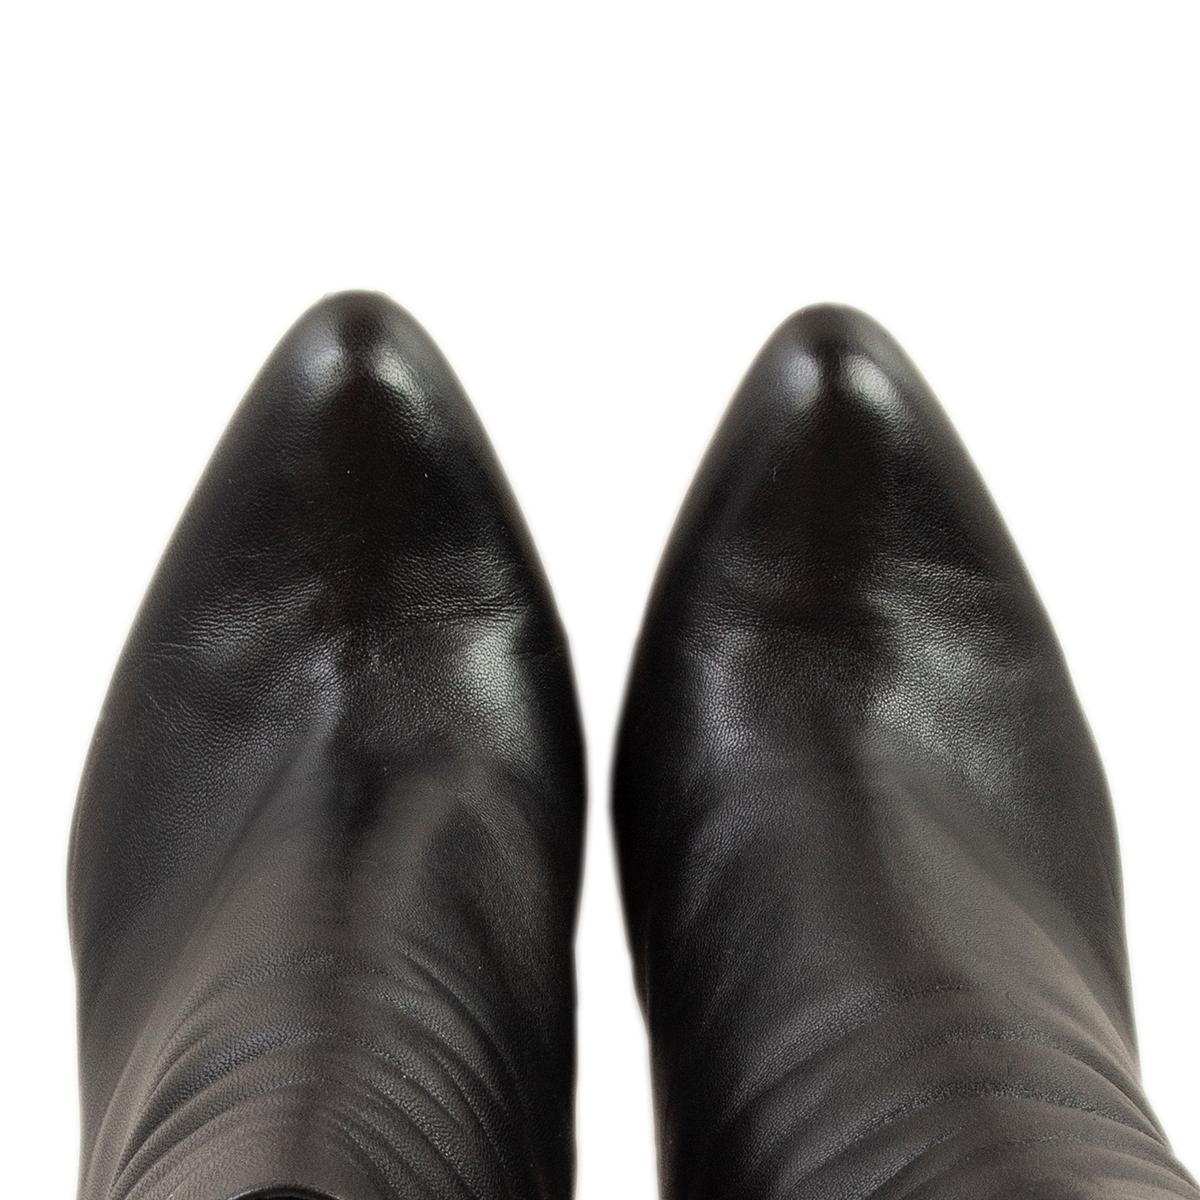 GIANVITO ROSSI black leather GOJEE Tassel Ankle Boots Shoes 38 In Excellent Condition For Sale In Zürich, CH